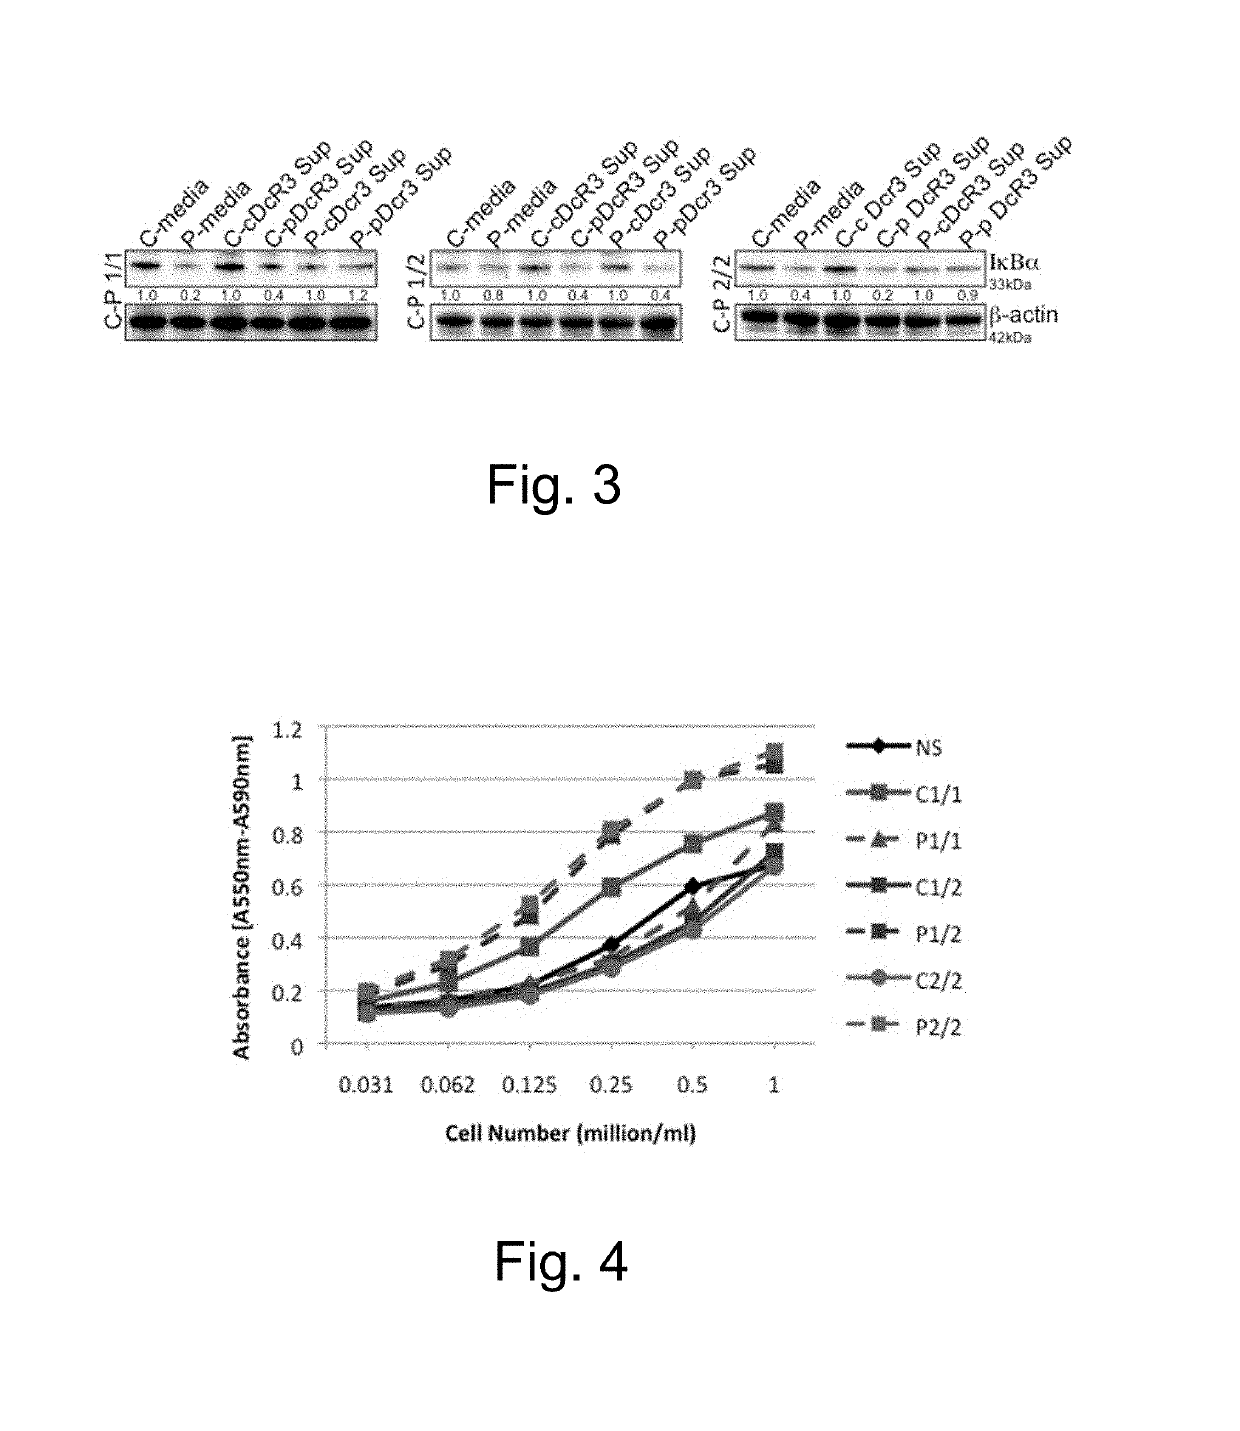 Methods of treating autoimmune conditions in patients with genetic variations in DcR3 or in a DcR3 network gene